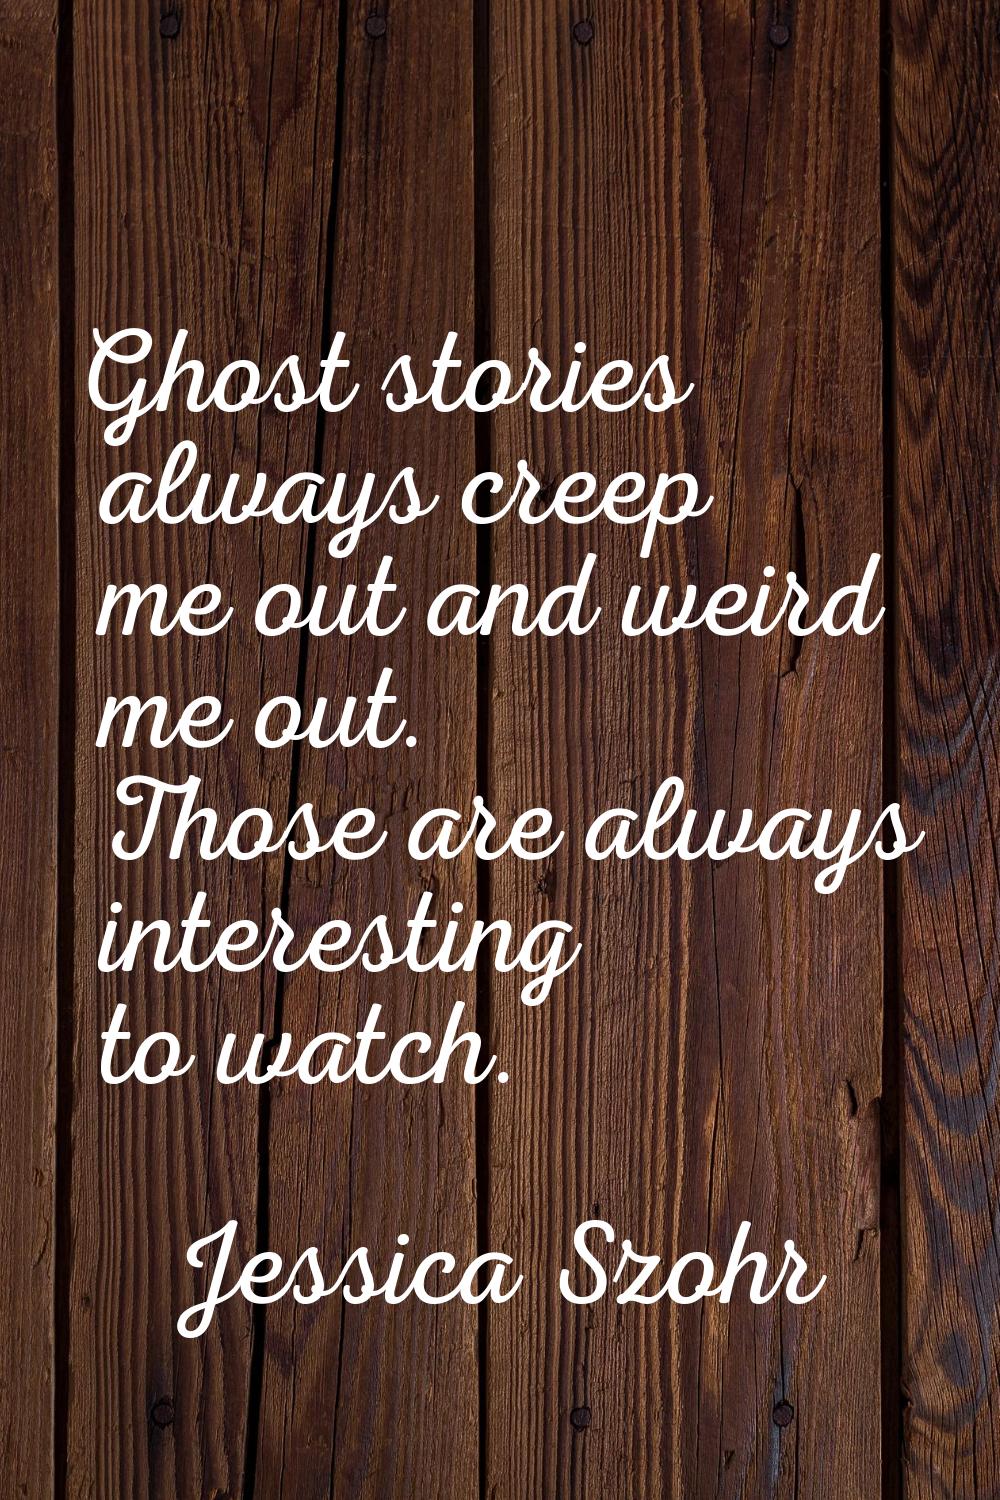 Ghost stories always creep me out and weird me out. Those are always interesting to watch.